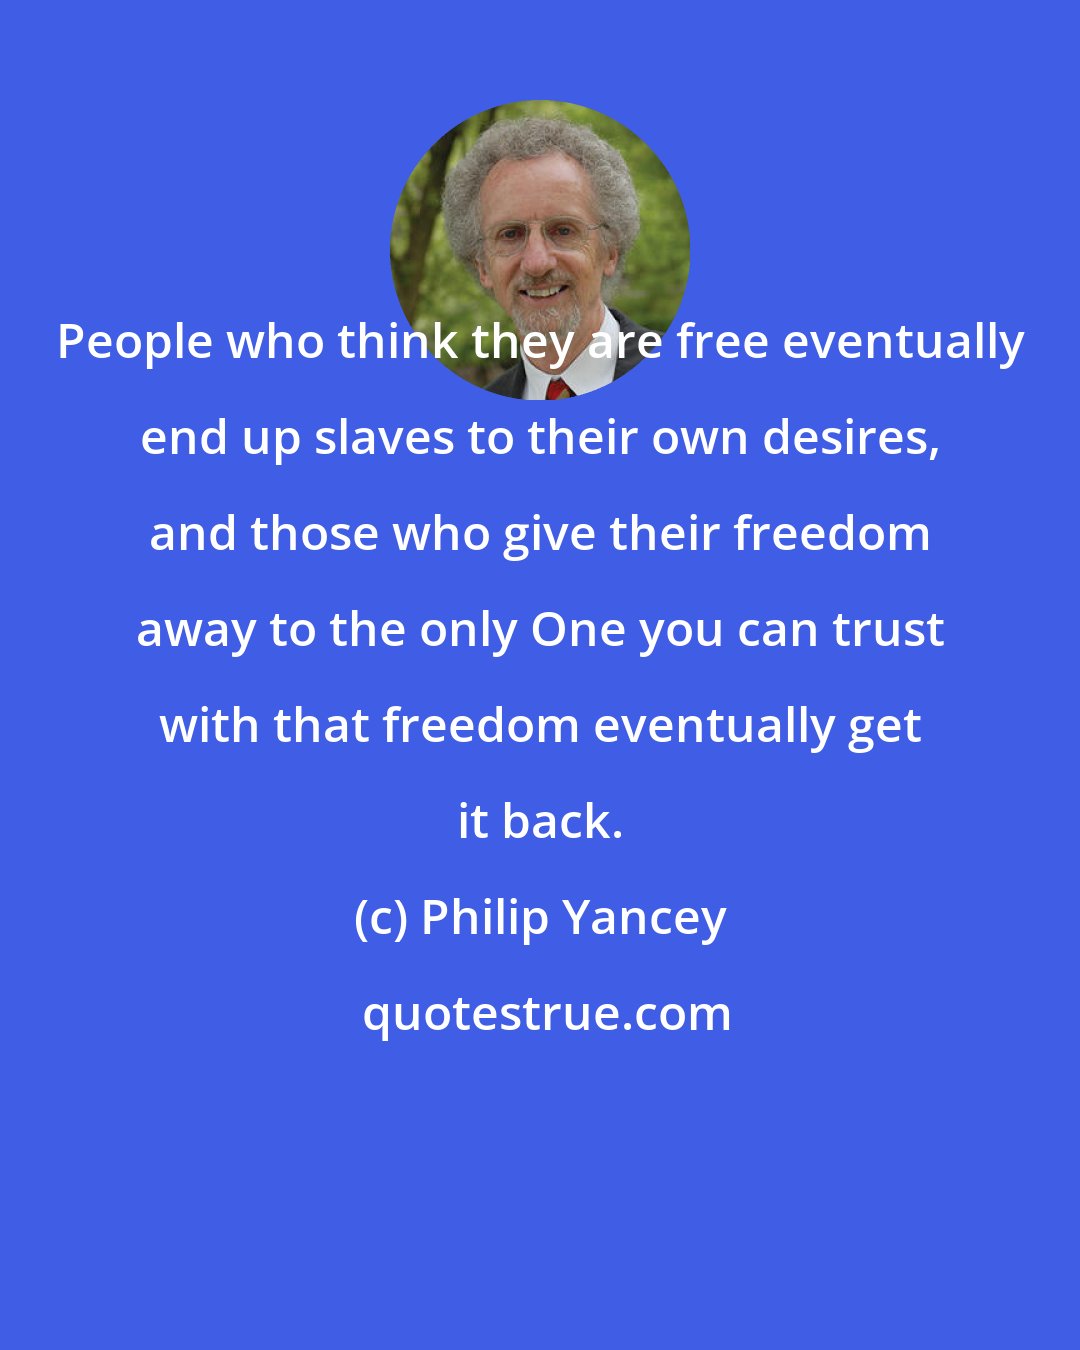 Philip Yancey: People who think they are free eventually end up slaves to their own desires, and those who give their freedom away to the only One you can trust with that freedom eventually get it back.